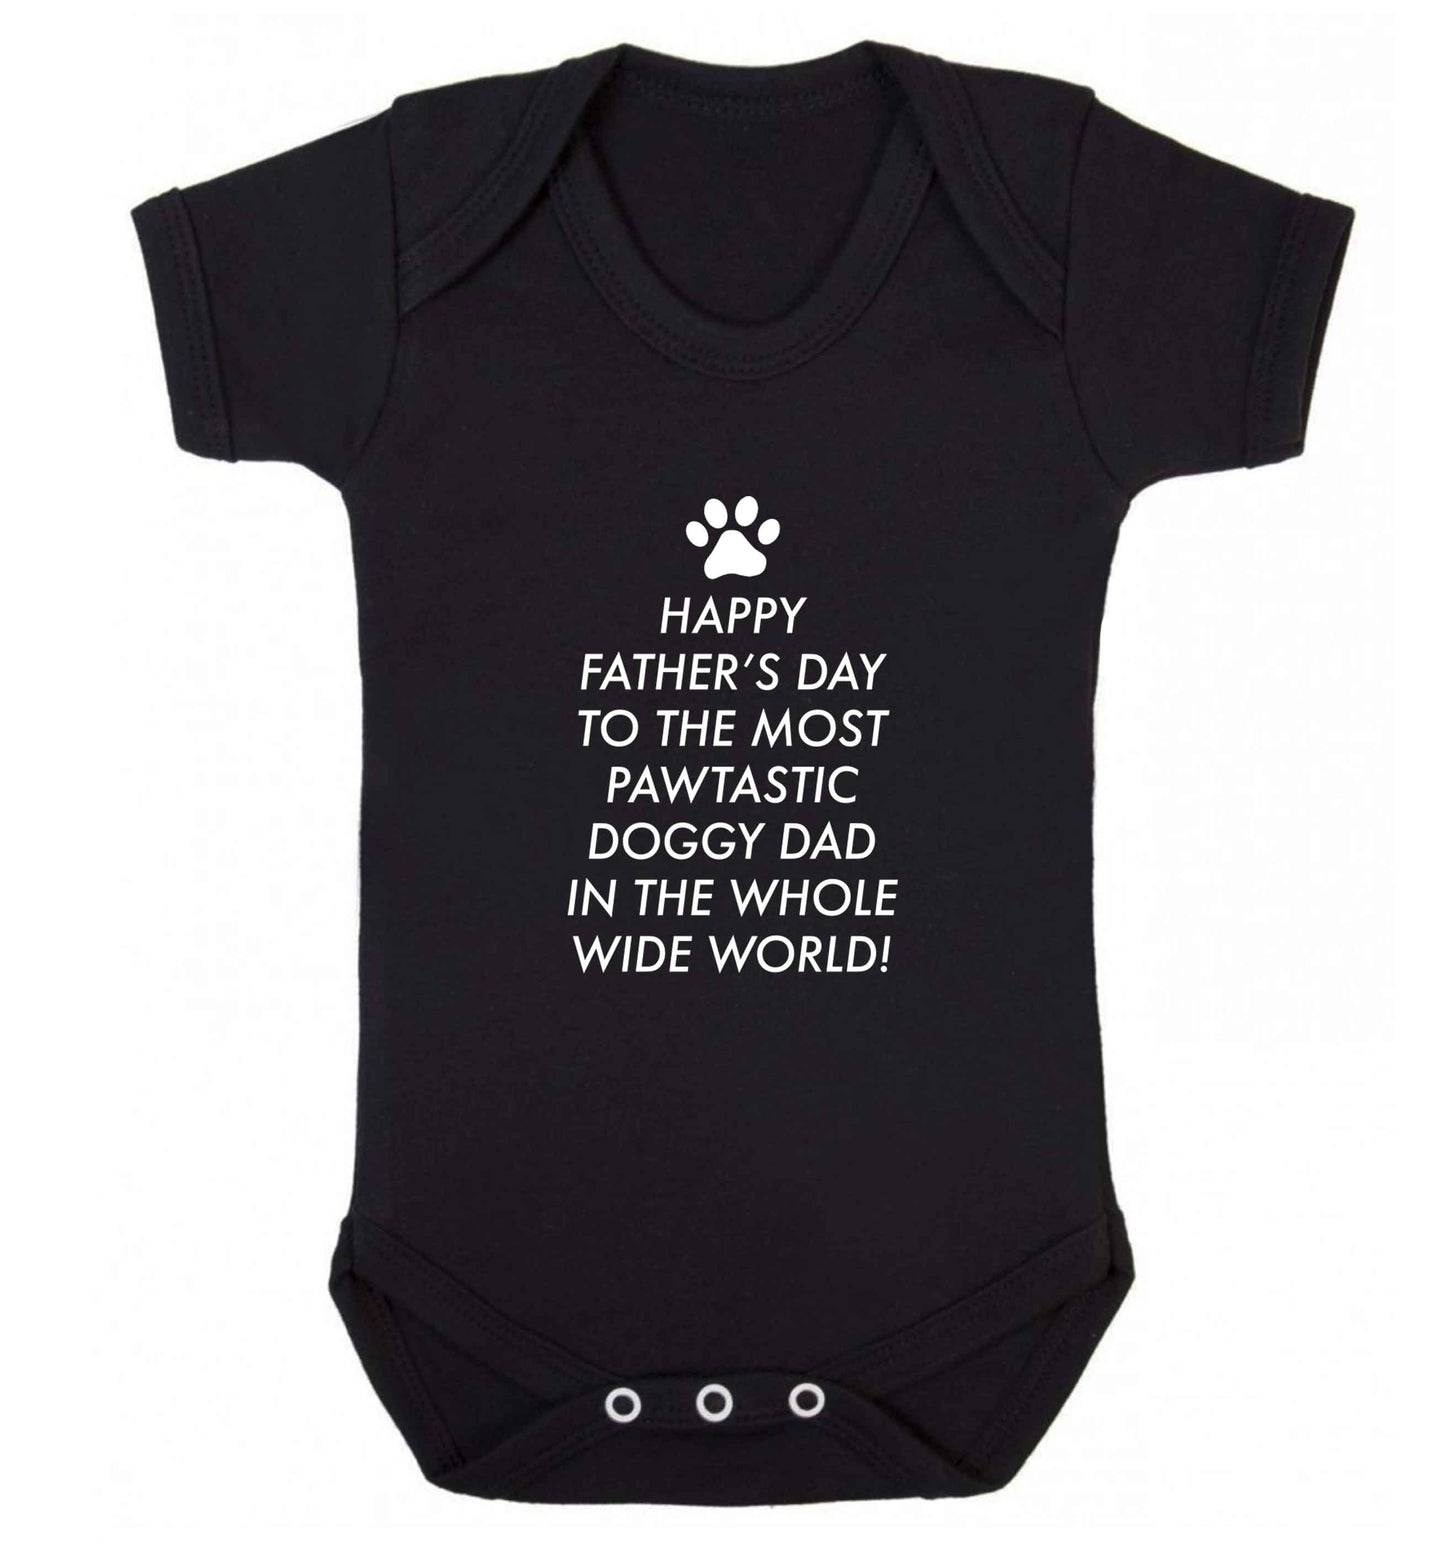 Happy Father's day to the most pawtastic doggy dad in the whole wide world!baby vest black 18-24 months